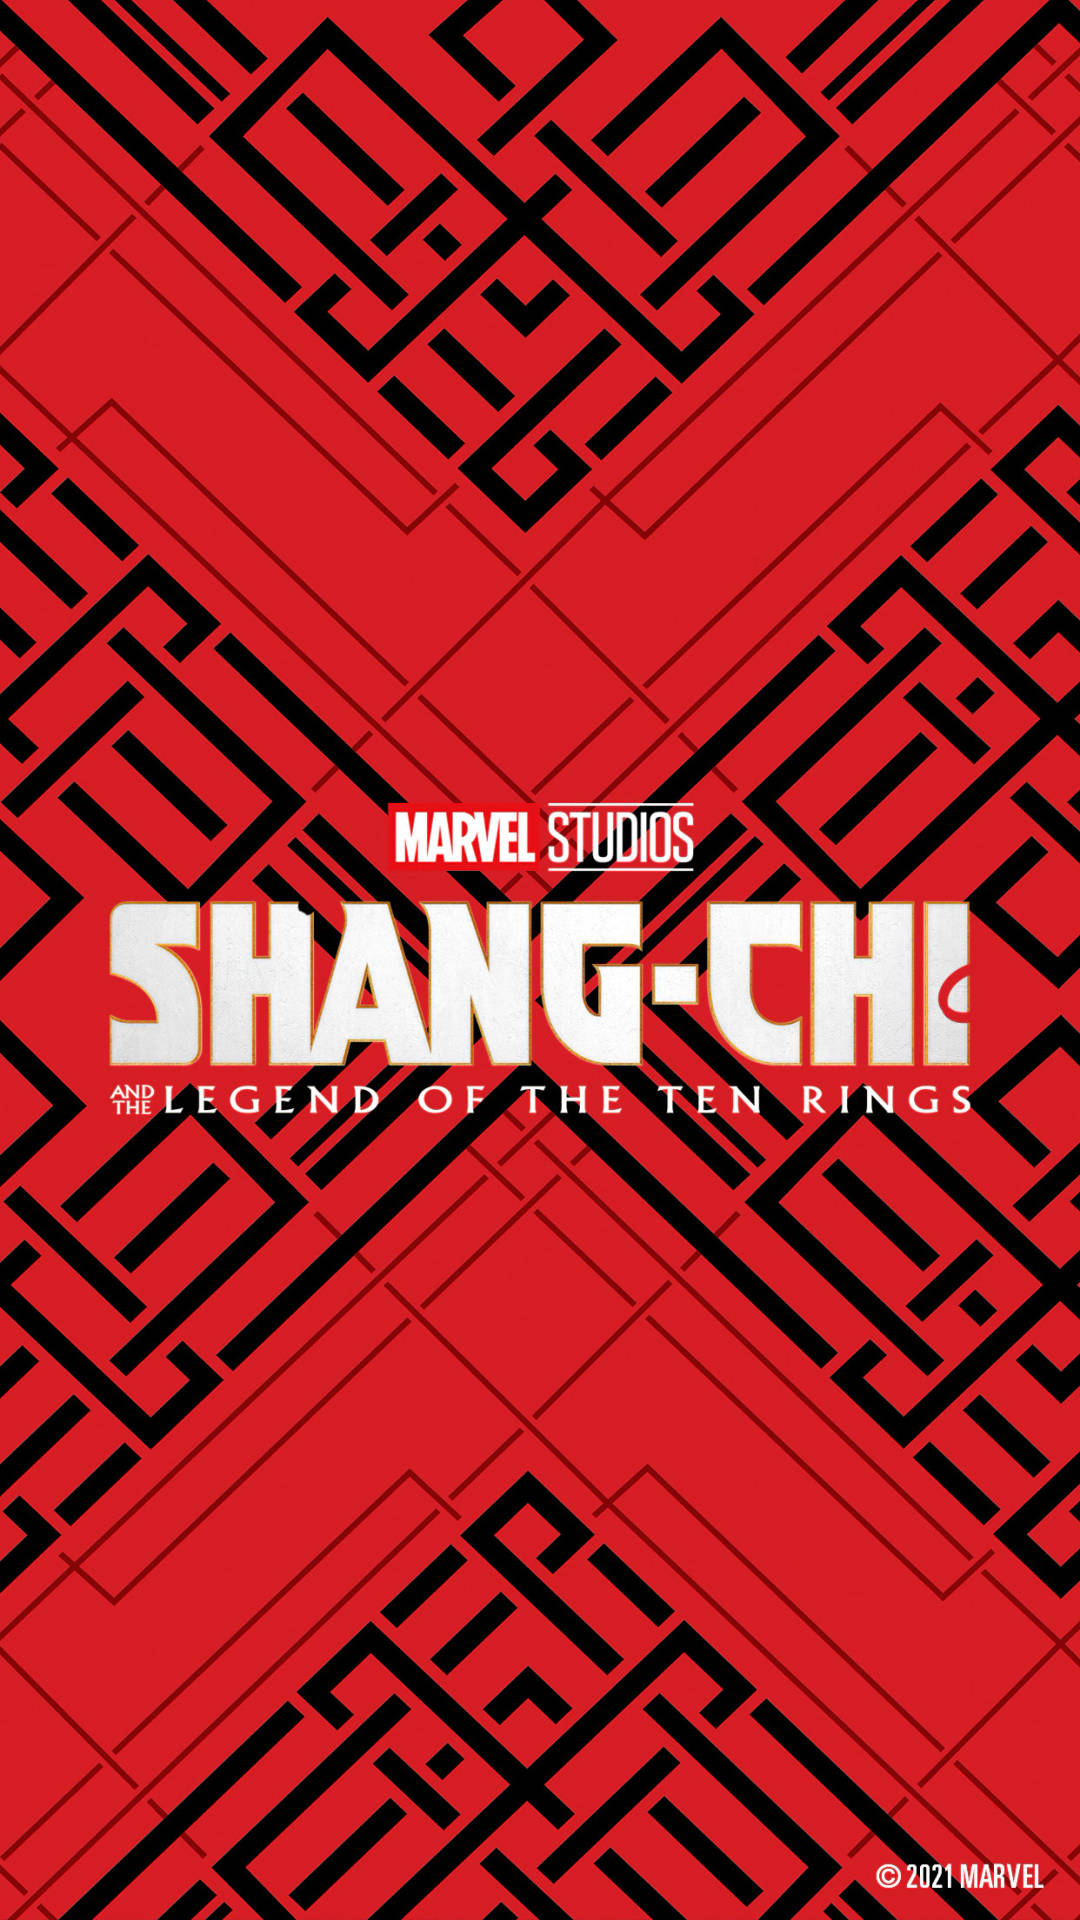 Shang-chi Geometric Poster Background